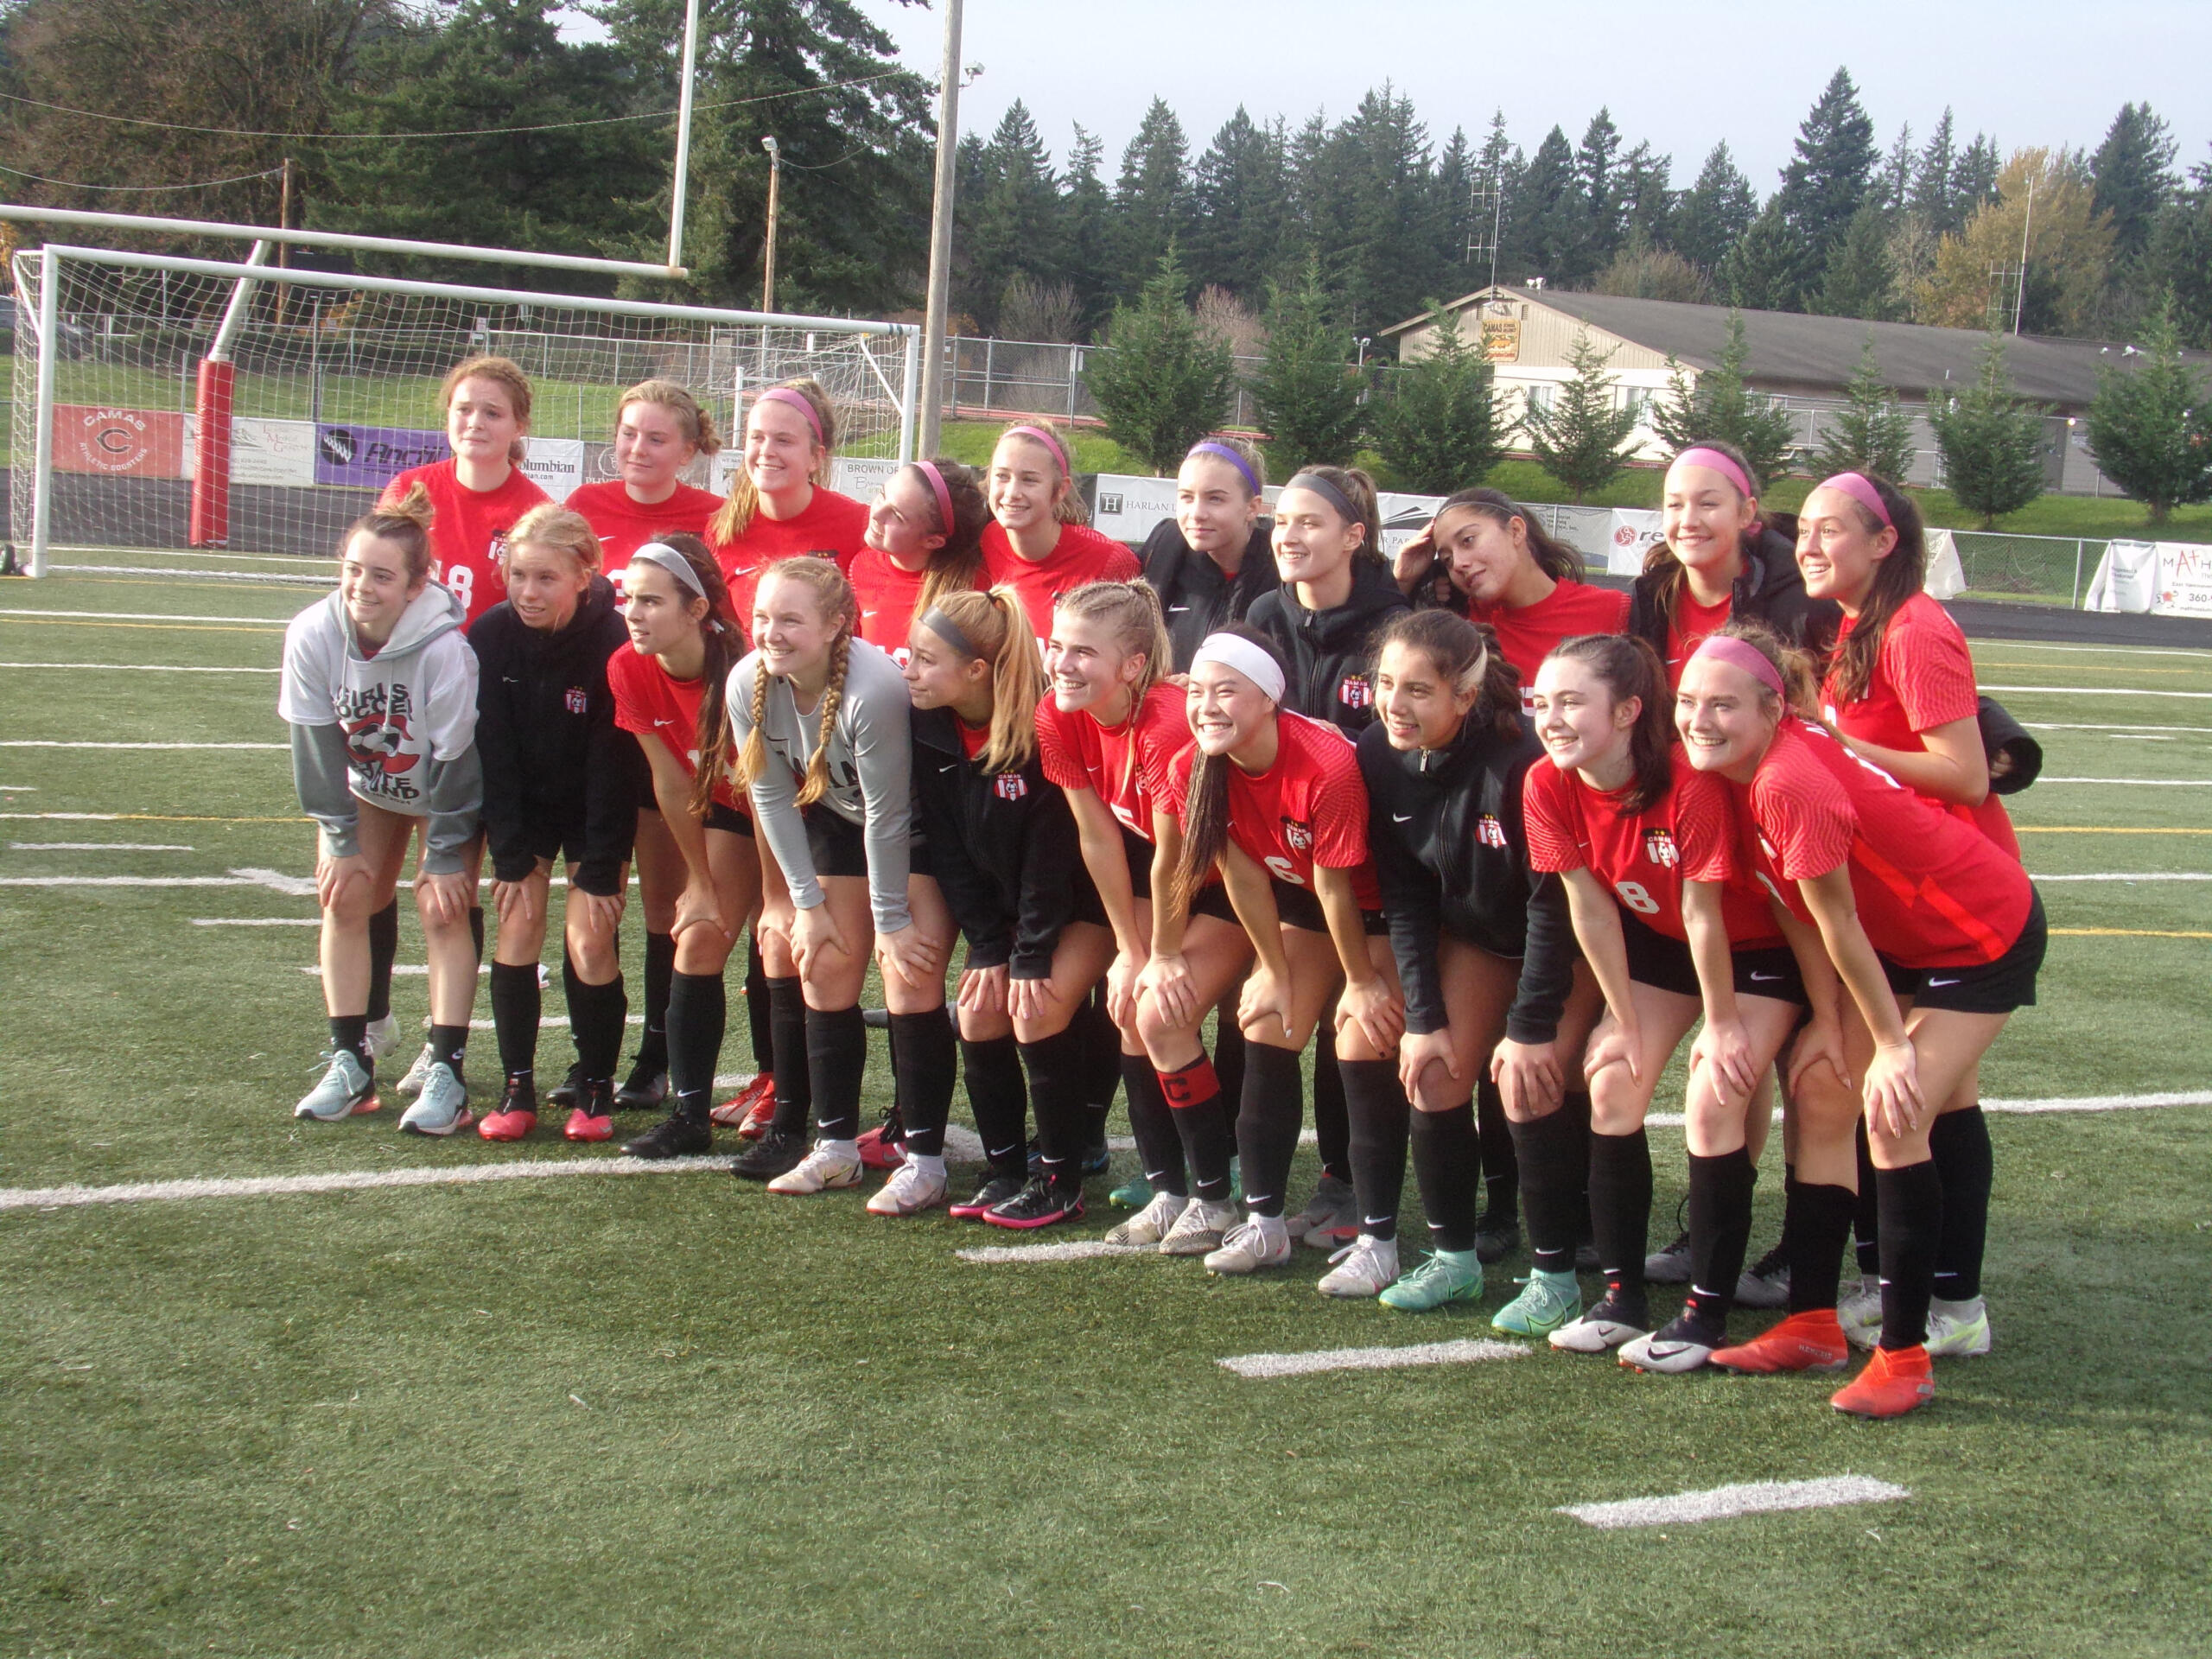 The Camas girls soccer team poses for a team photo after beating West Valley of Yakima 3-2 in the 4A state quarterfinals at Doc Harris Stadium in Camas (Tim Martinez/The Columbian)